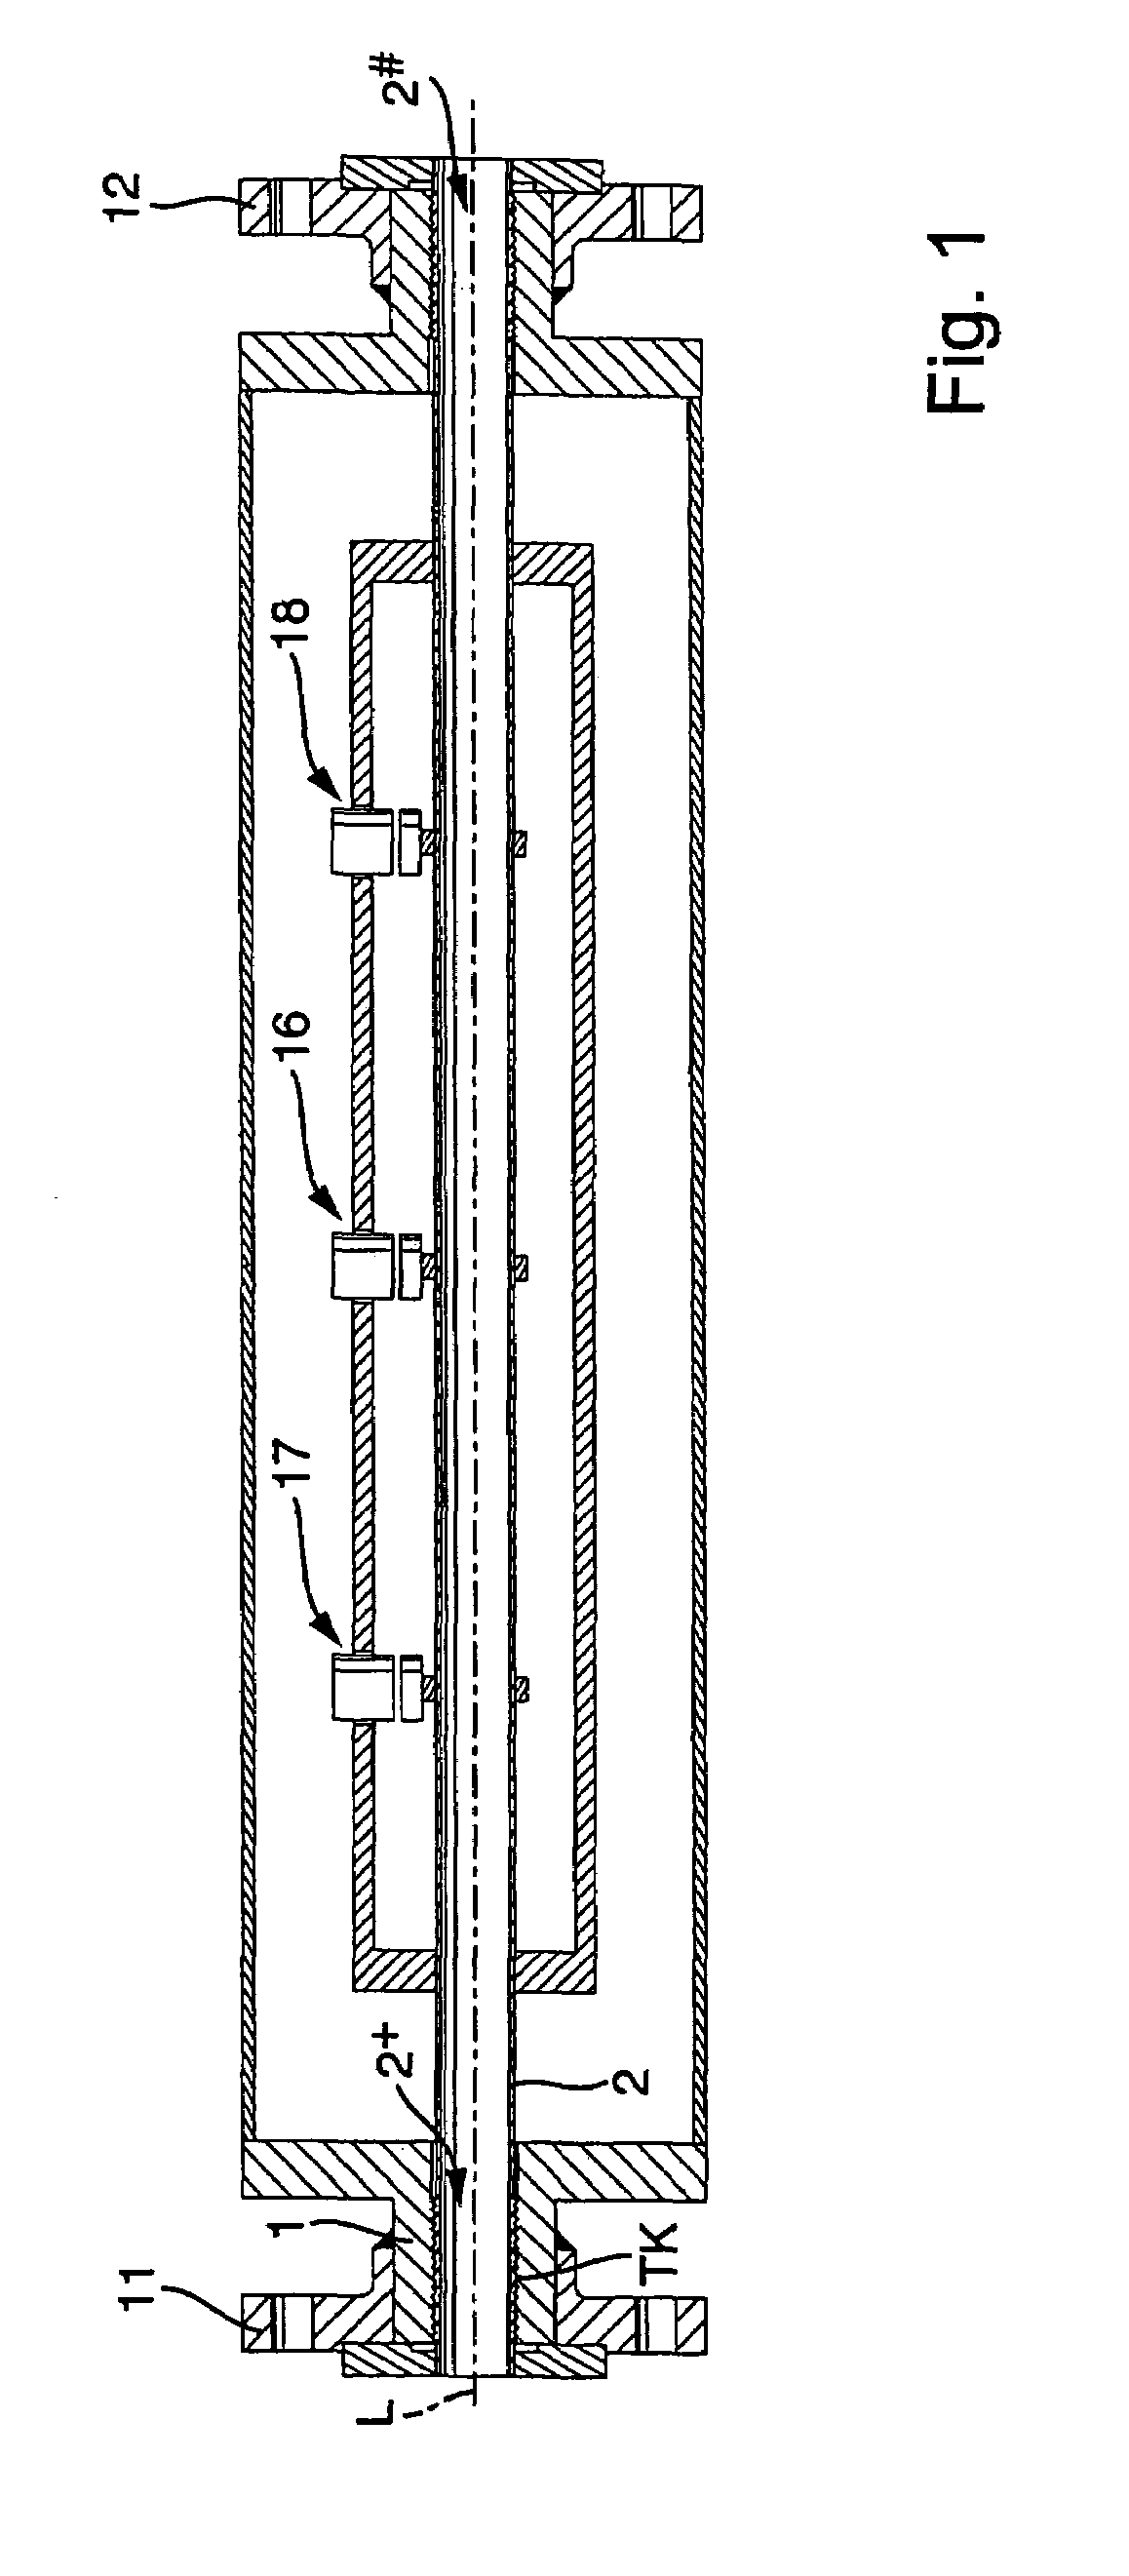 Composite system, method for its manufacture, and measurement pickup using such a composite system